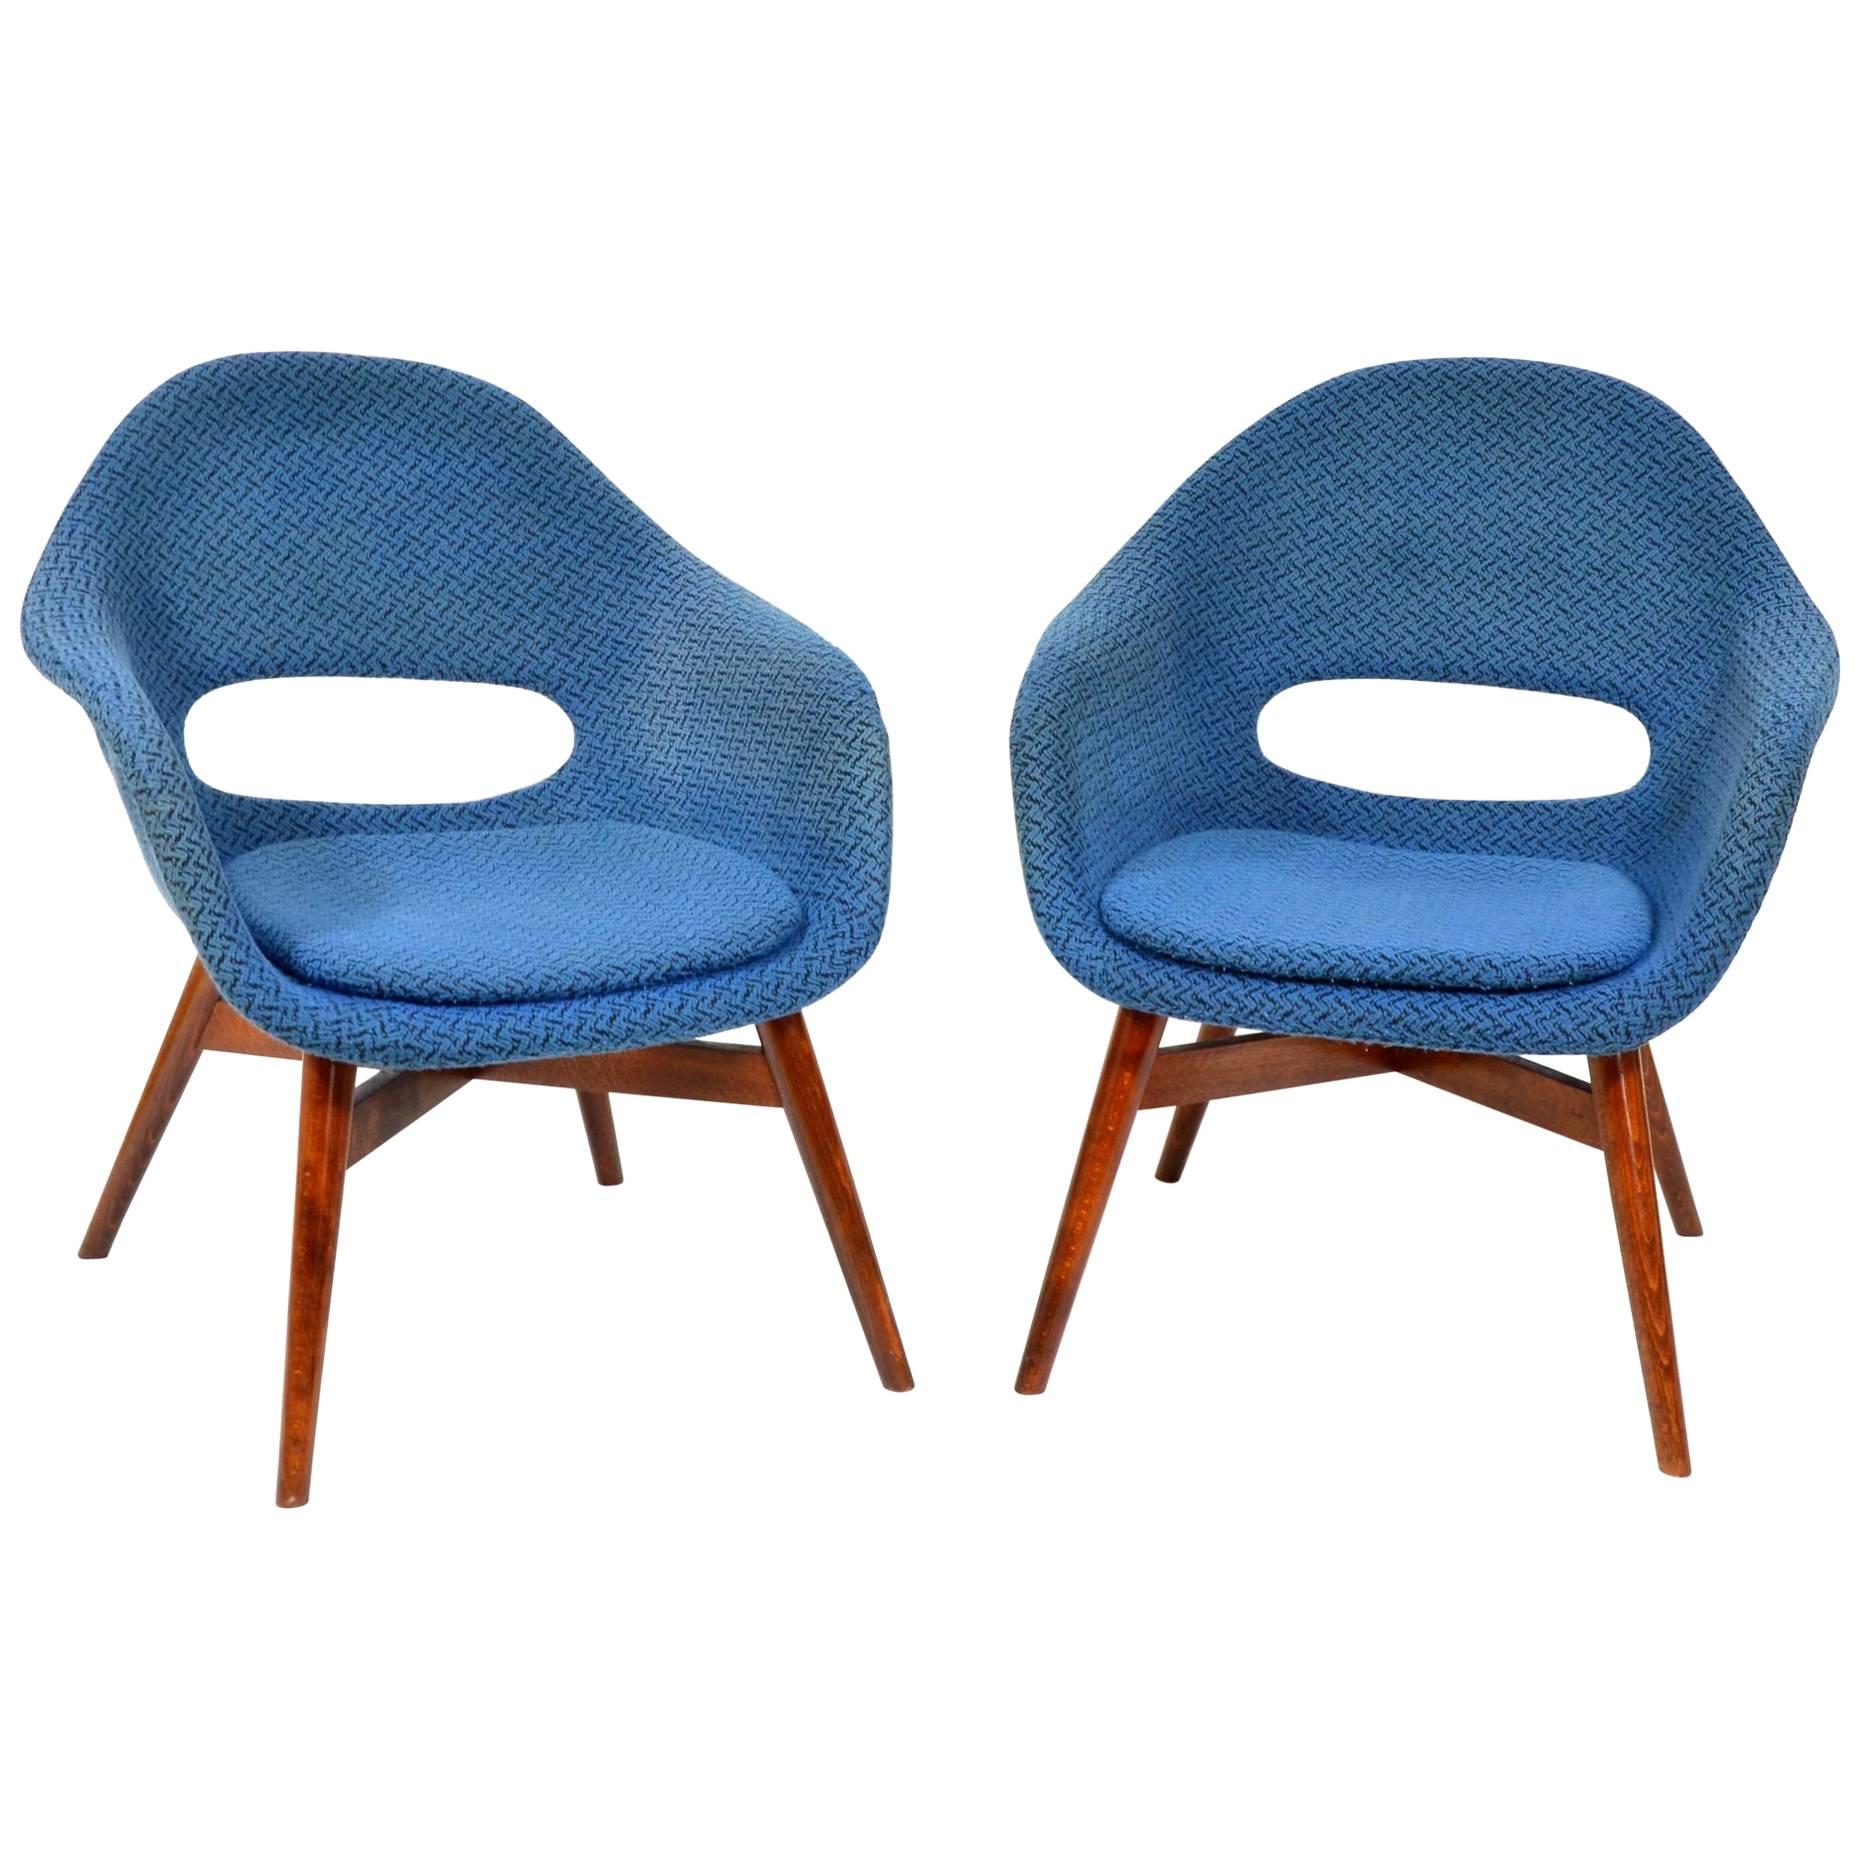 Pair of Blue Shell Chairs by Miroslav Navrátil, 1960s For Sale